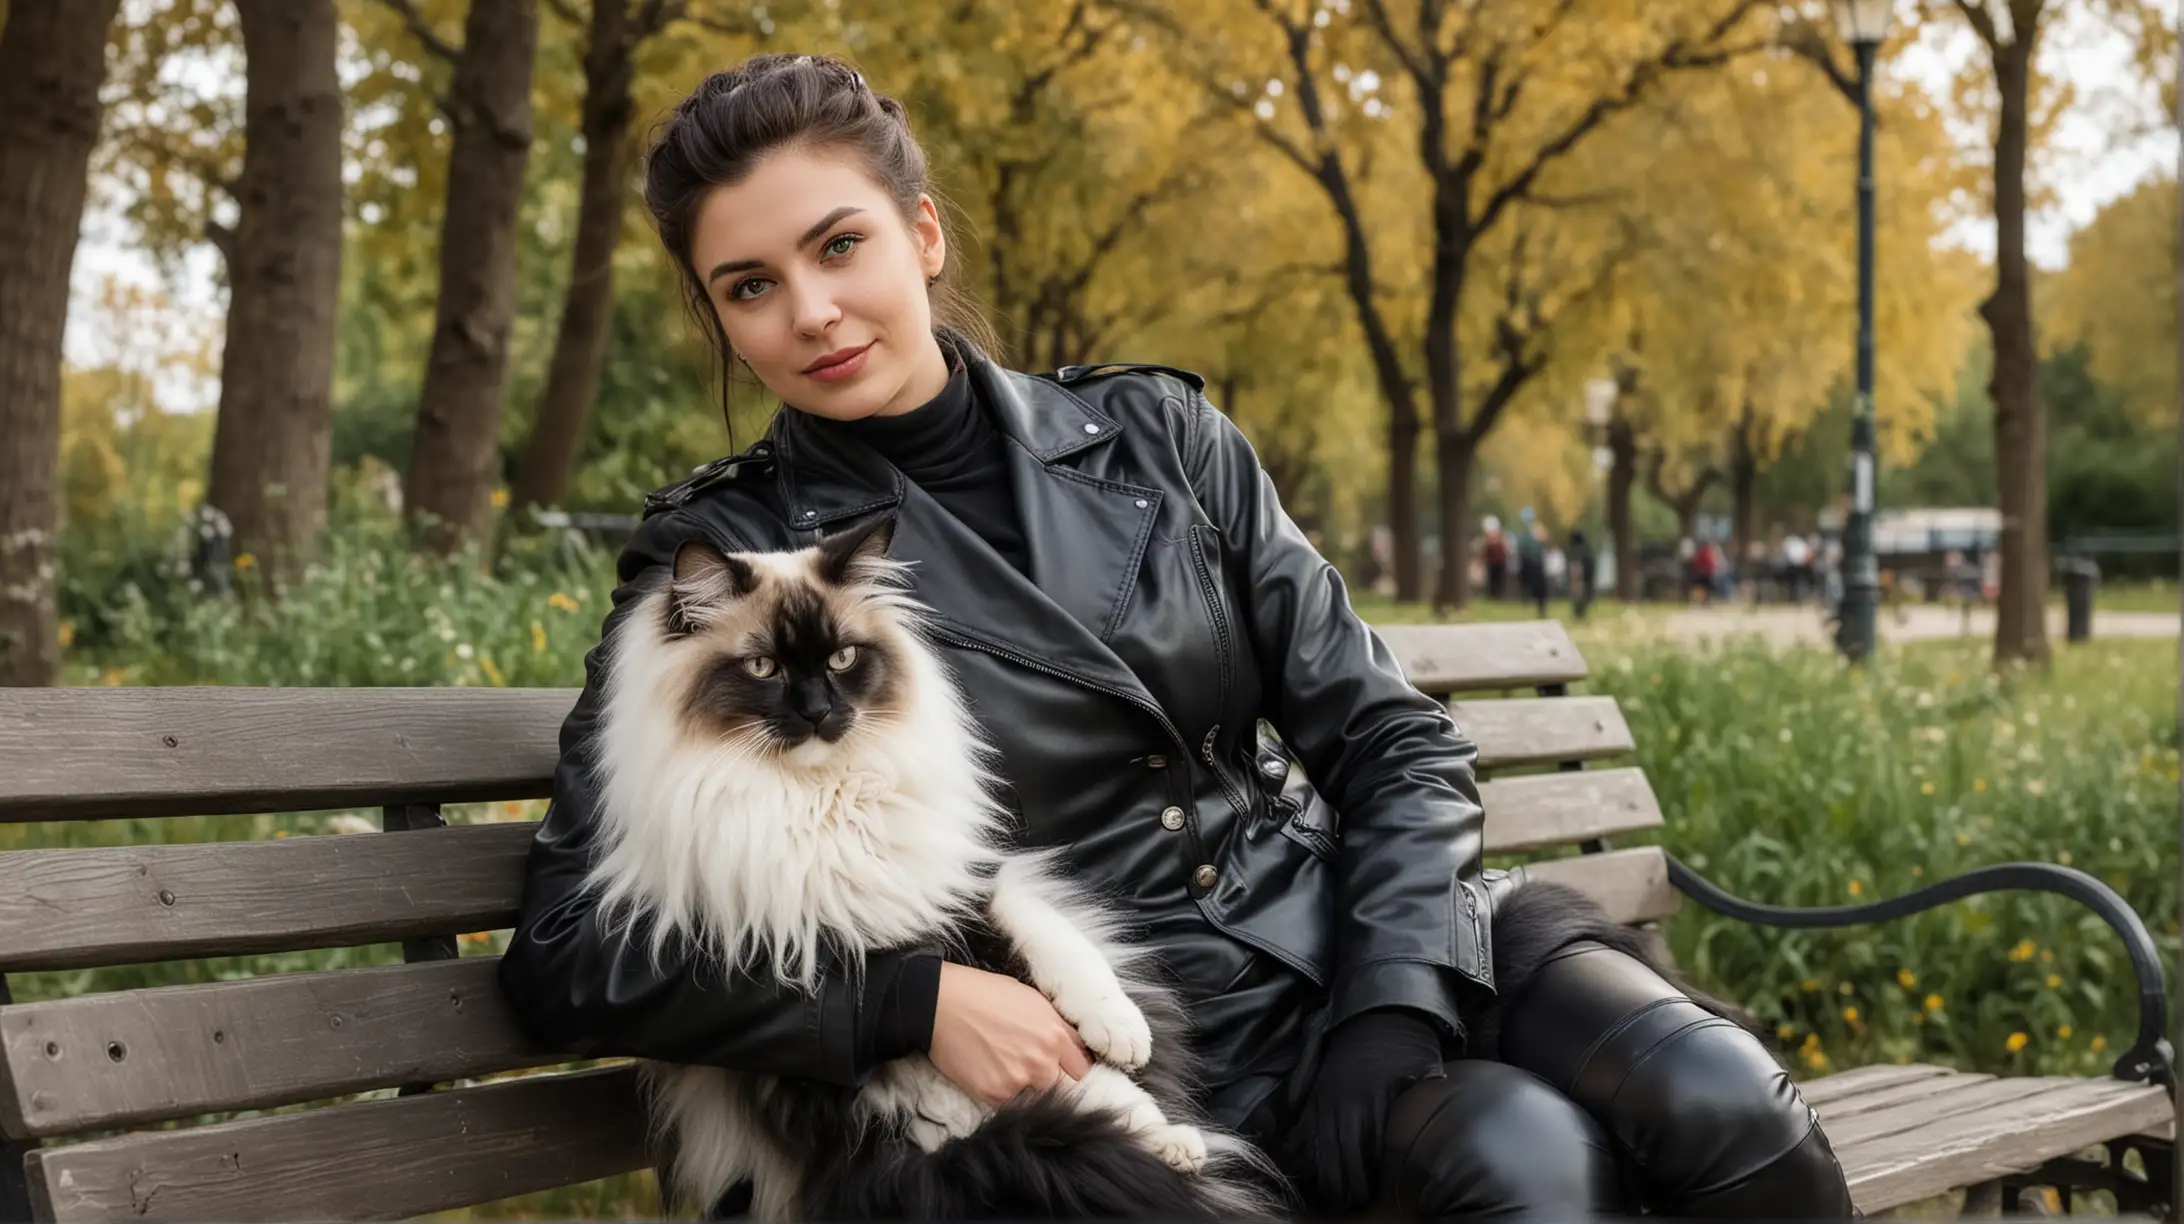 the portrait of a modern woman in a leather black uniform with her favourite angora cat, on a bench in a park